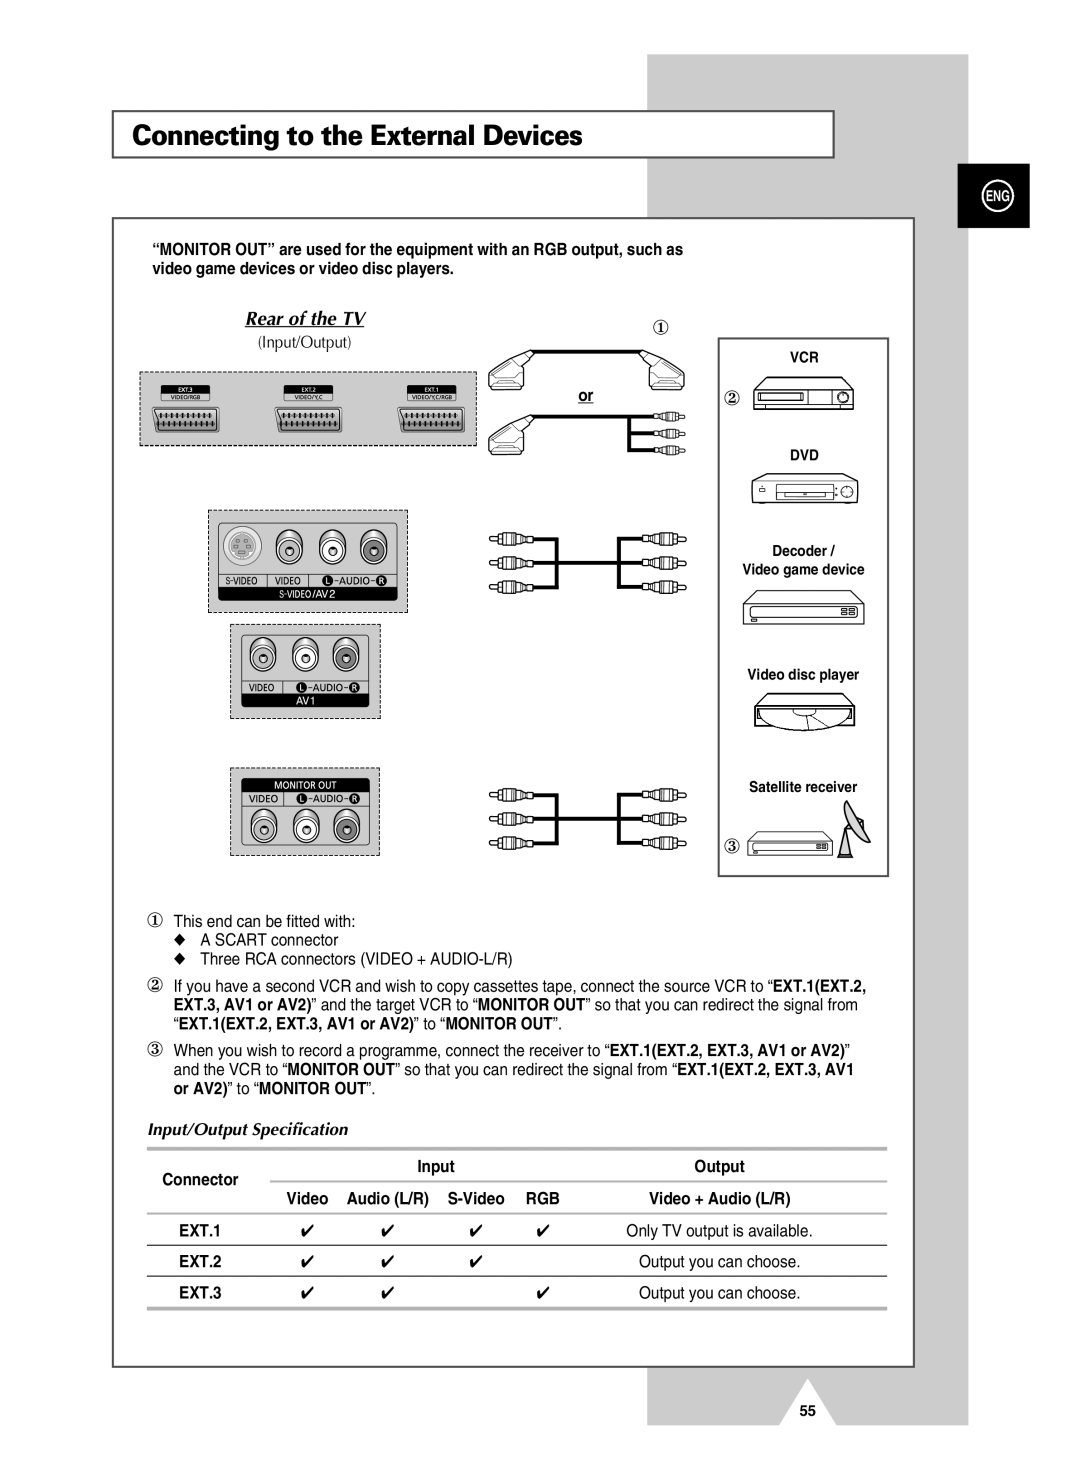 Samsung PS-37S4A manual Connecting to the External Devices, Rear of the TV, Input/Output Specification 